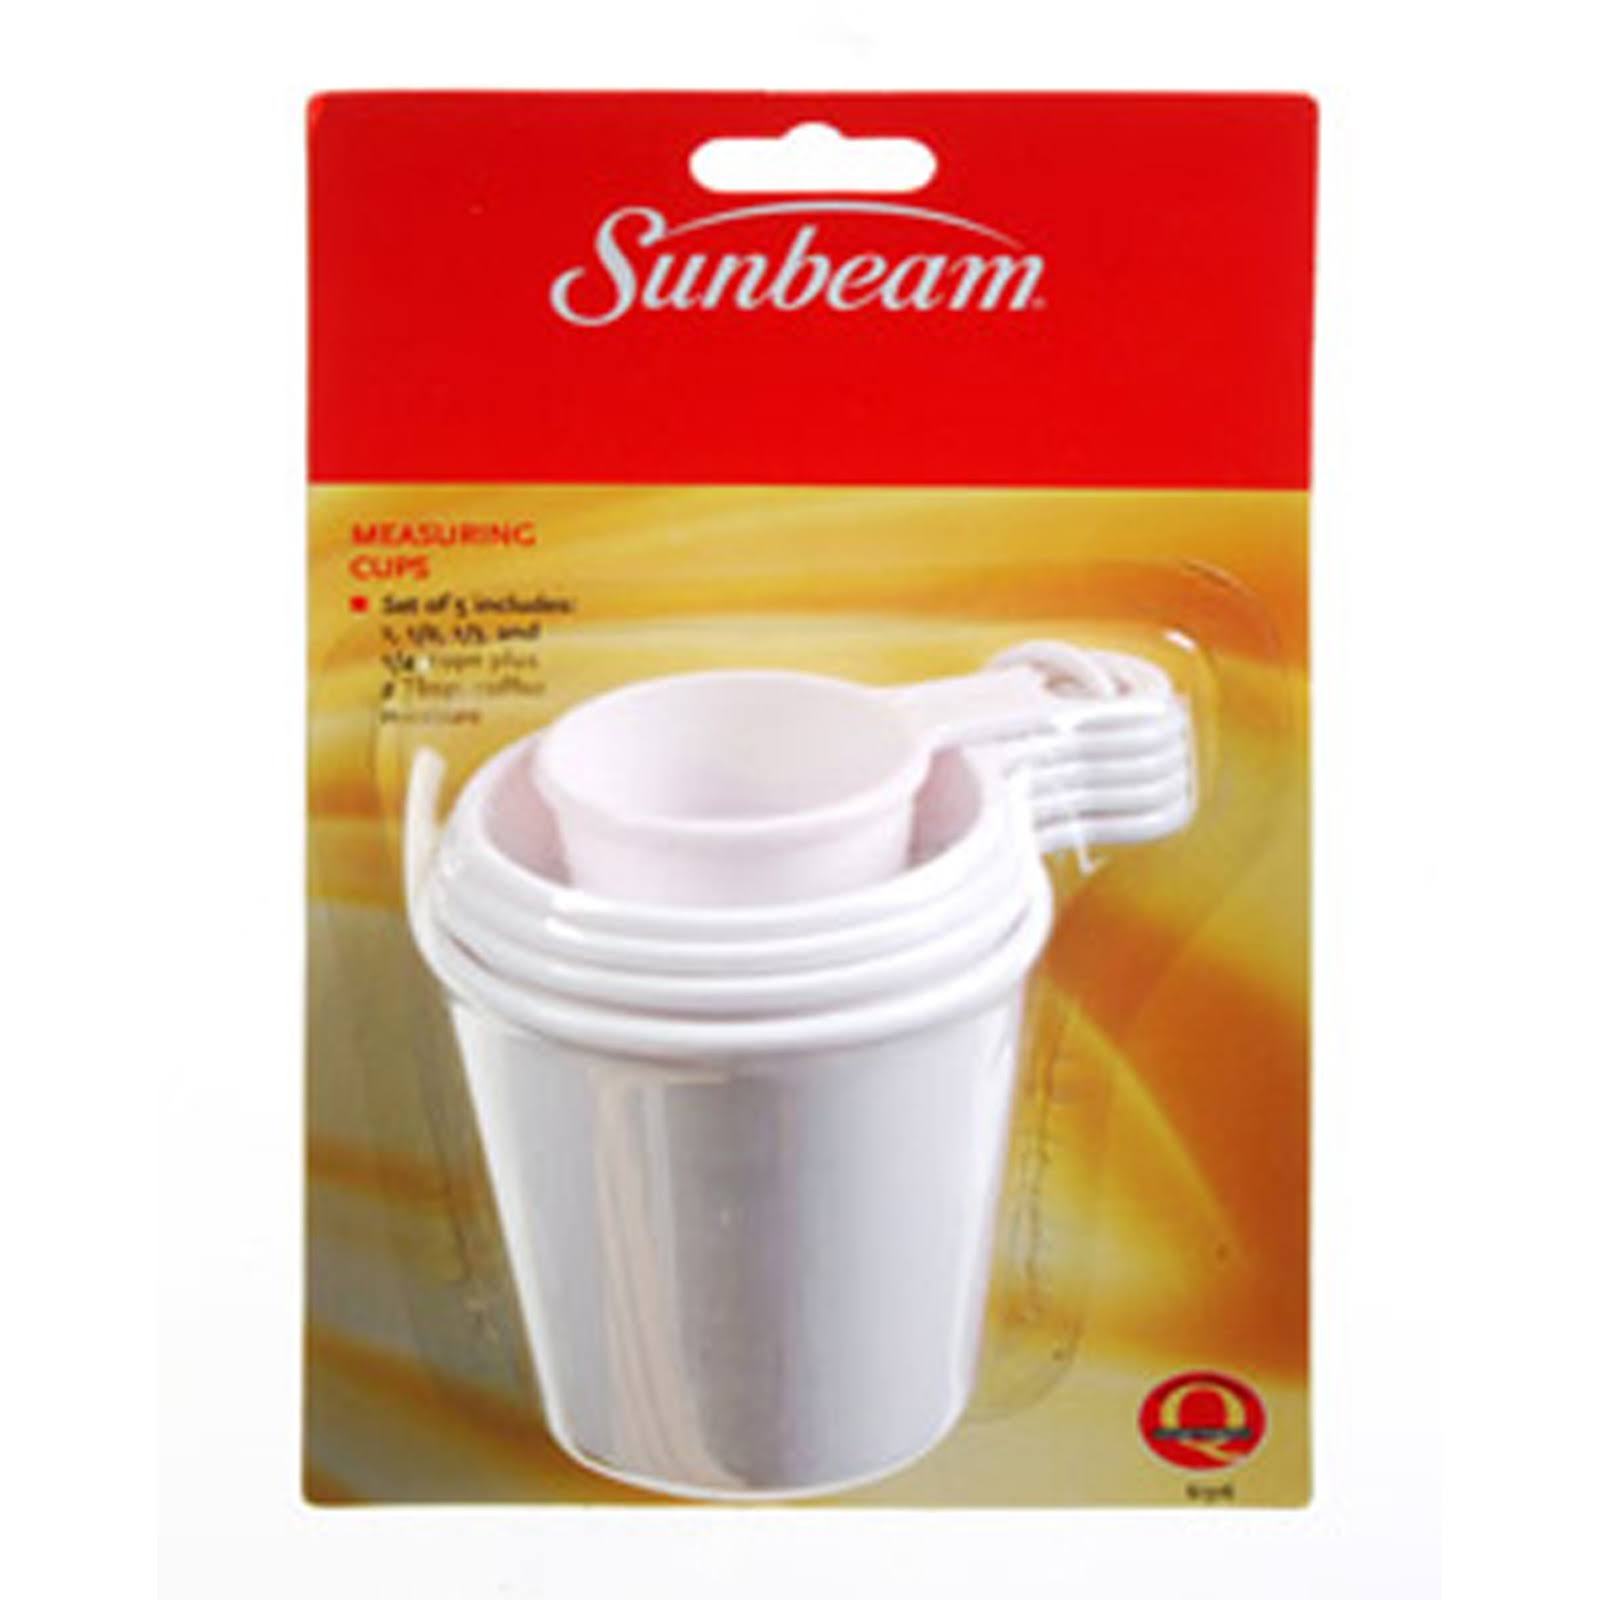 Robinson Home Products 871685335 61316 Plastic Sunbeam Measuring Cup - 5pcs